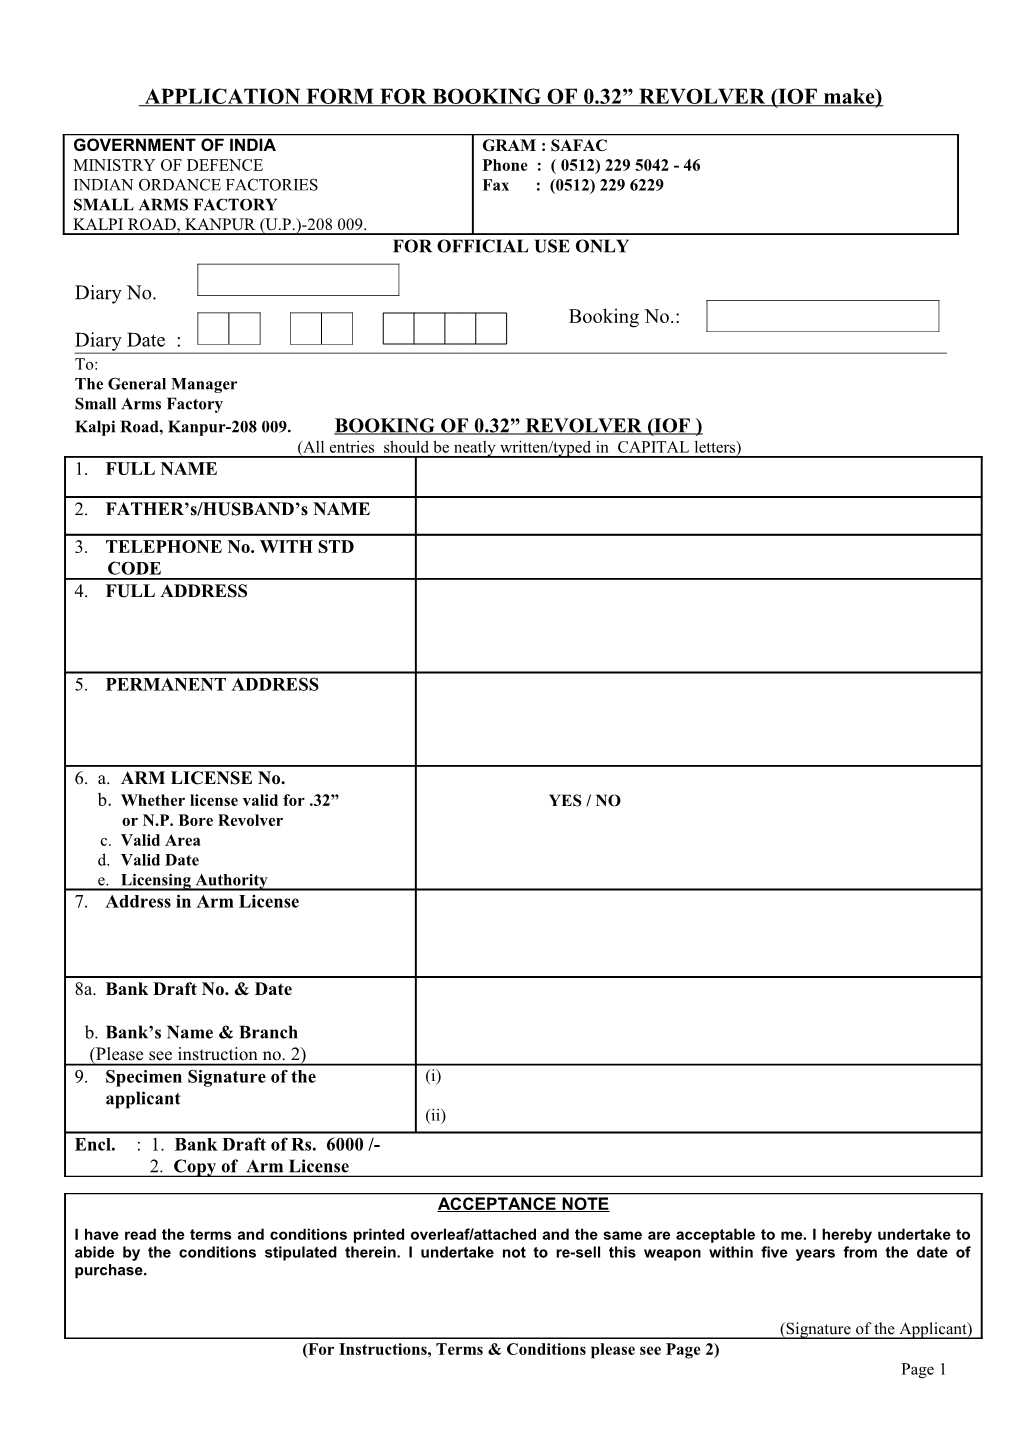 Application Form for Booking of 0